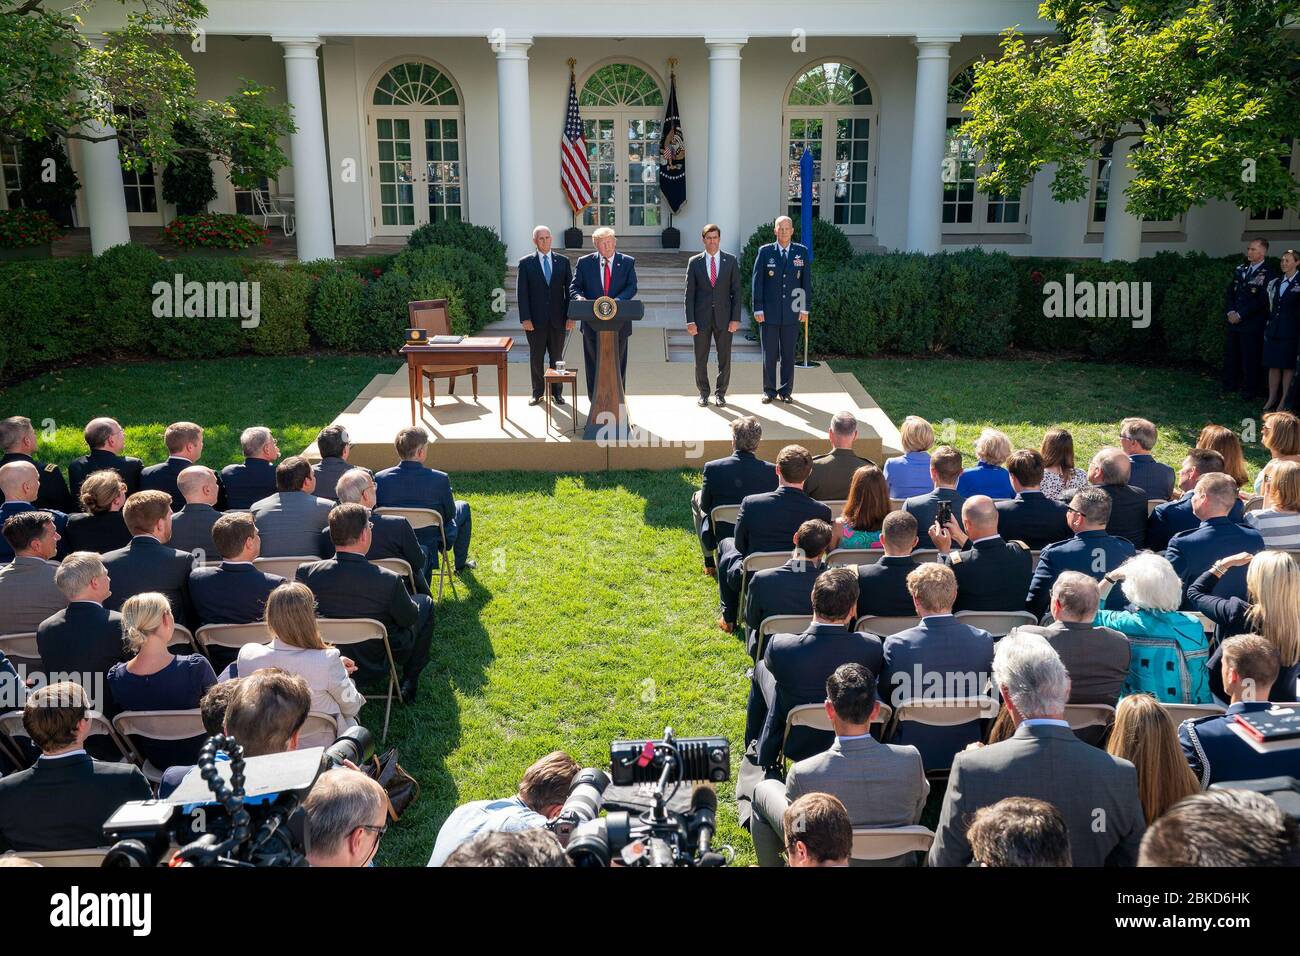 President Donald J. Trump, joined by Vice President Mike Pence, Secretary of Defense Mark Esper and General John ”Jay” Raymond Commander of USSPACECOM, delivers remarks at the Establishment of the U.S. Space Command (USSPACECOM) Thursday, Aug. 29, 2019, in the Rose Garden of the White House. The Establishment of the U.S. Space Command Stock Photo